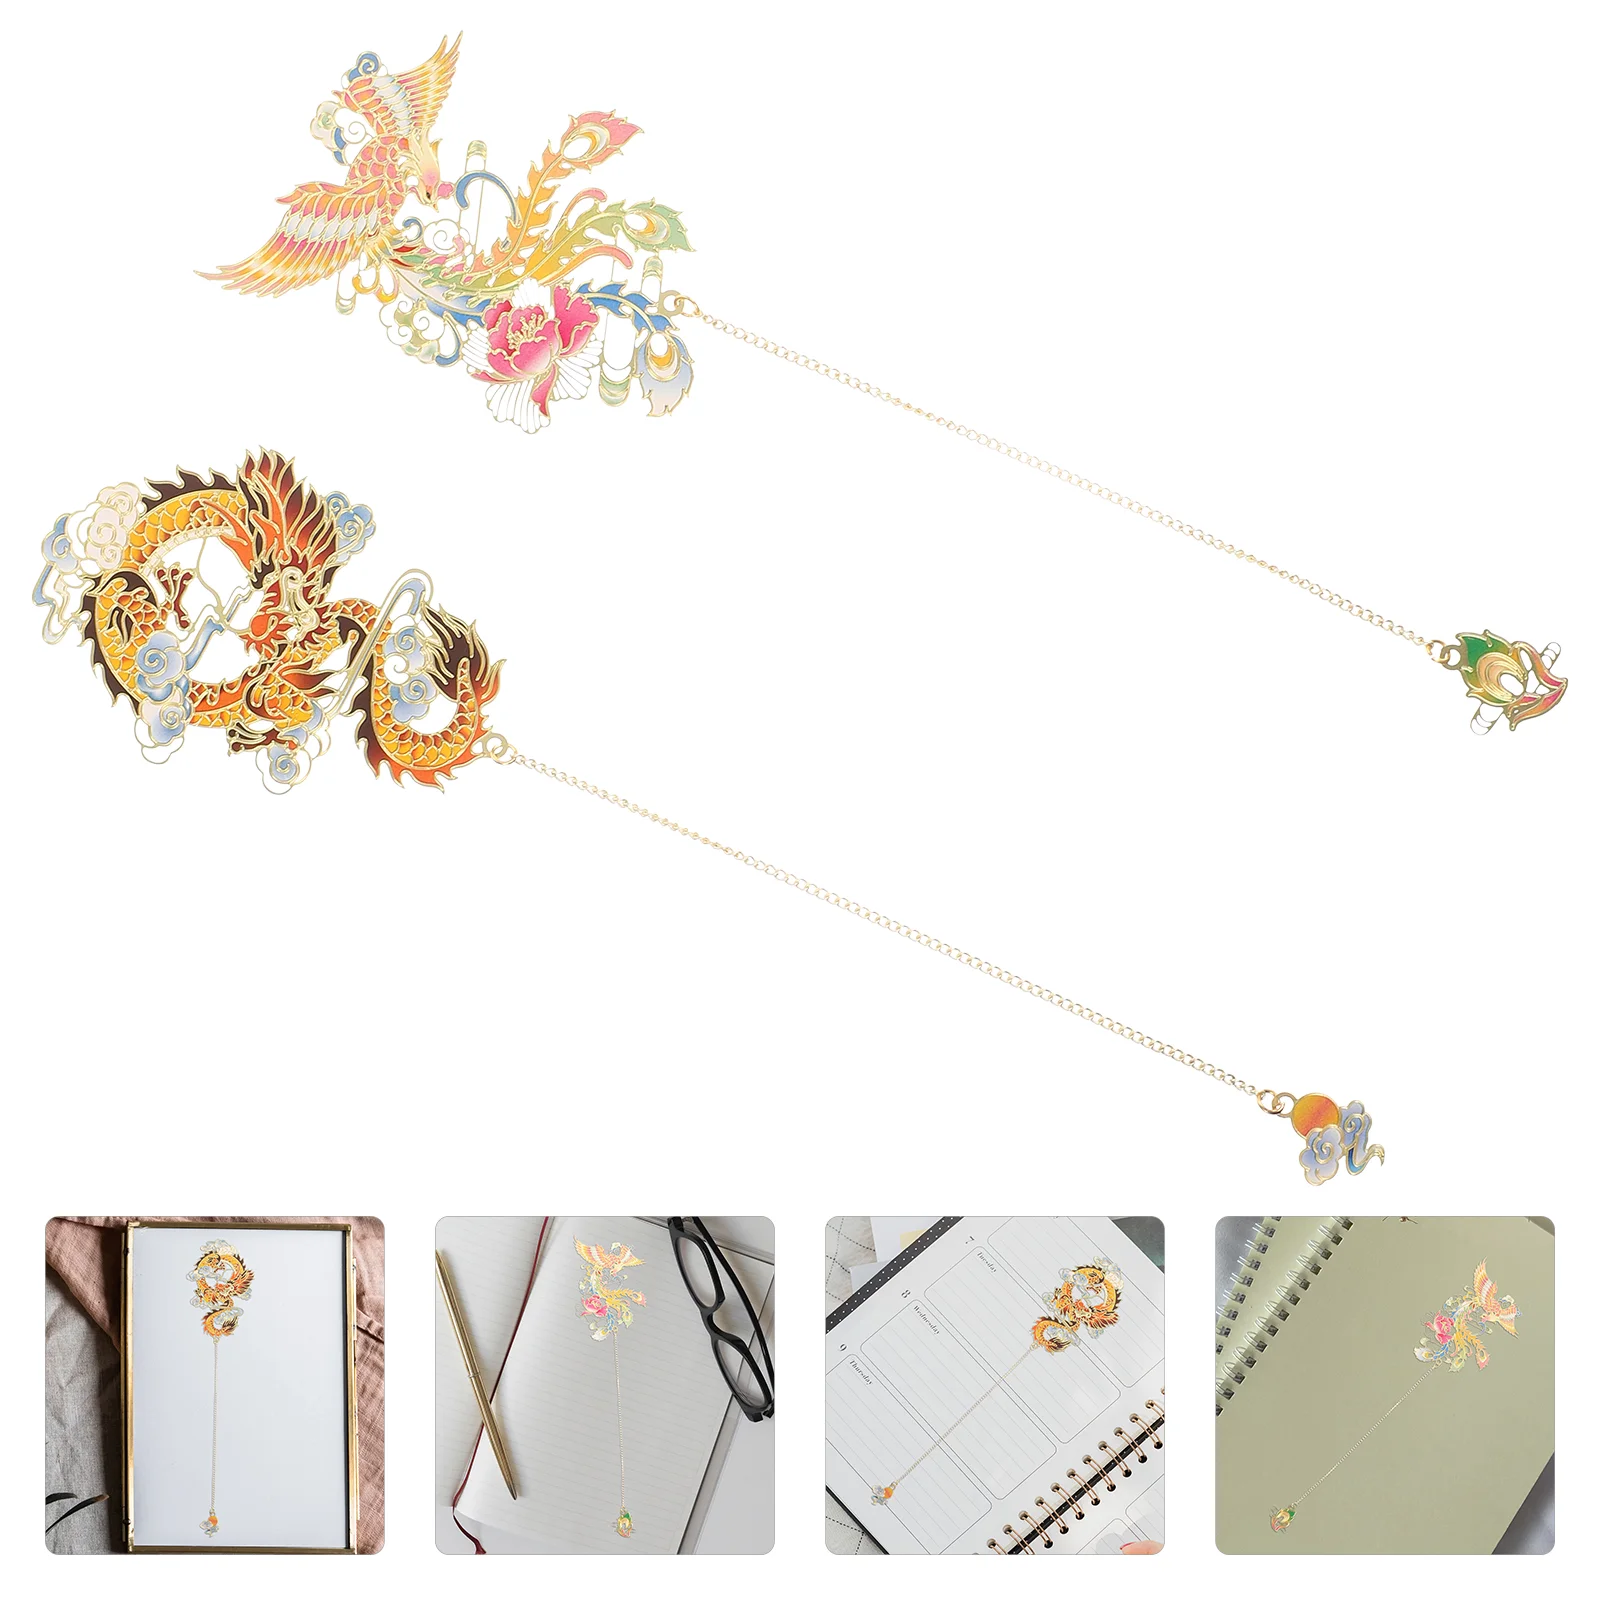 

2 Pcs Bookmark Students Stationery Kids The Gift Bookmarks Exquisite Marker Ancient Chinese Delicate Decorative Reading